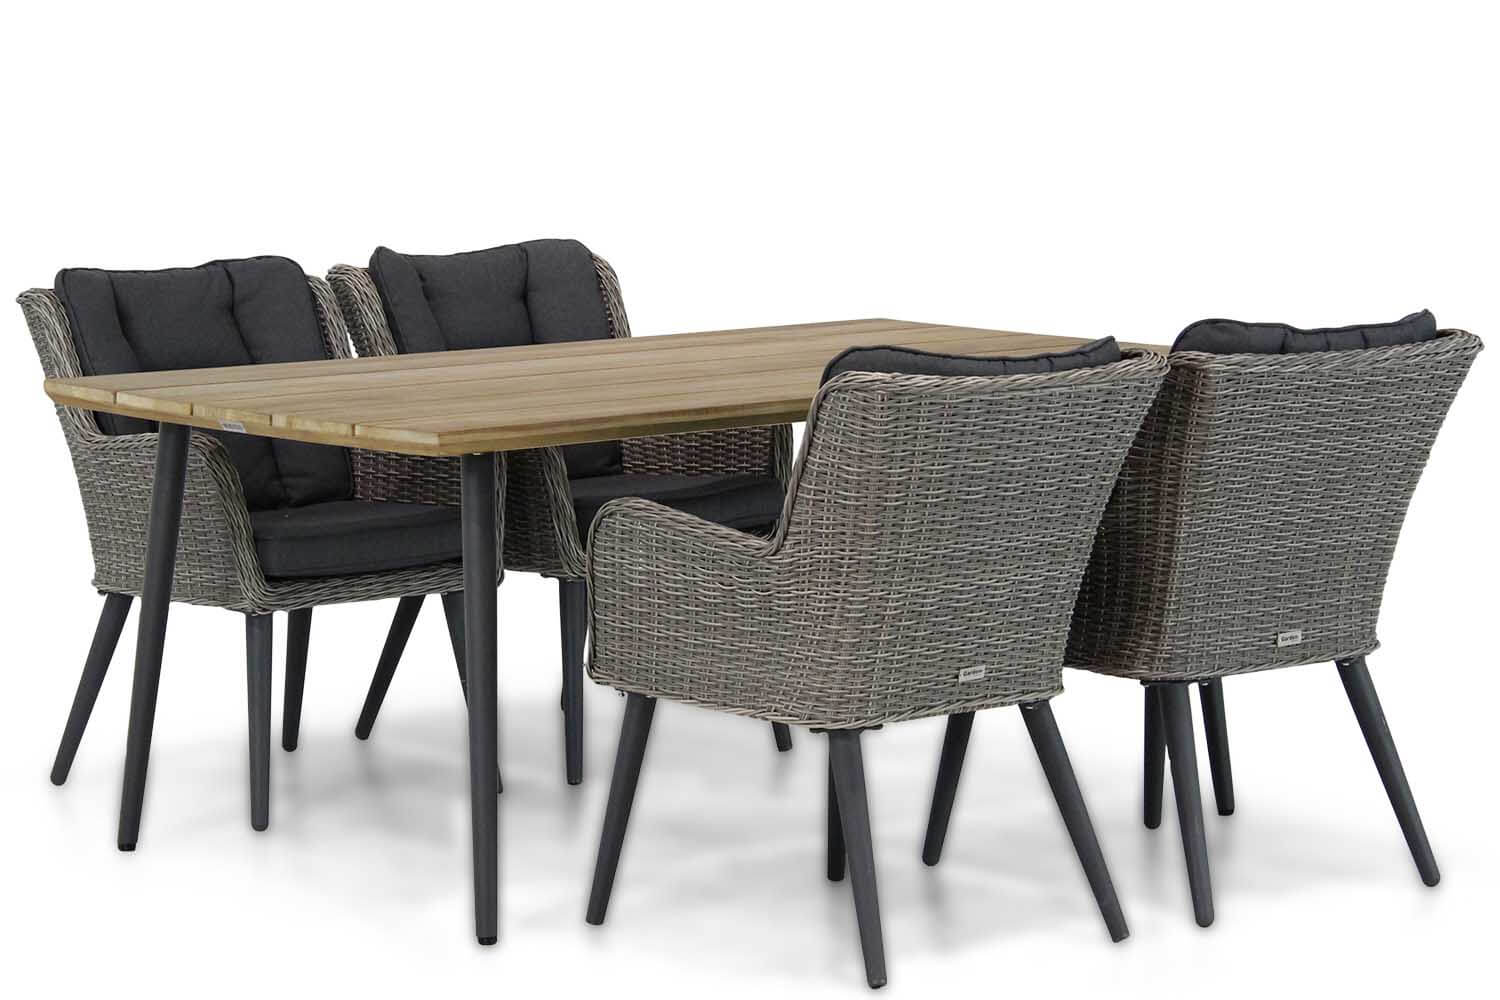 garden collections boston wicker dining tuinstoel montana tuintafel 180 cm - Garden Collections Boston/Montana 180 cm dining tuinset 5-delig